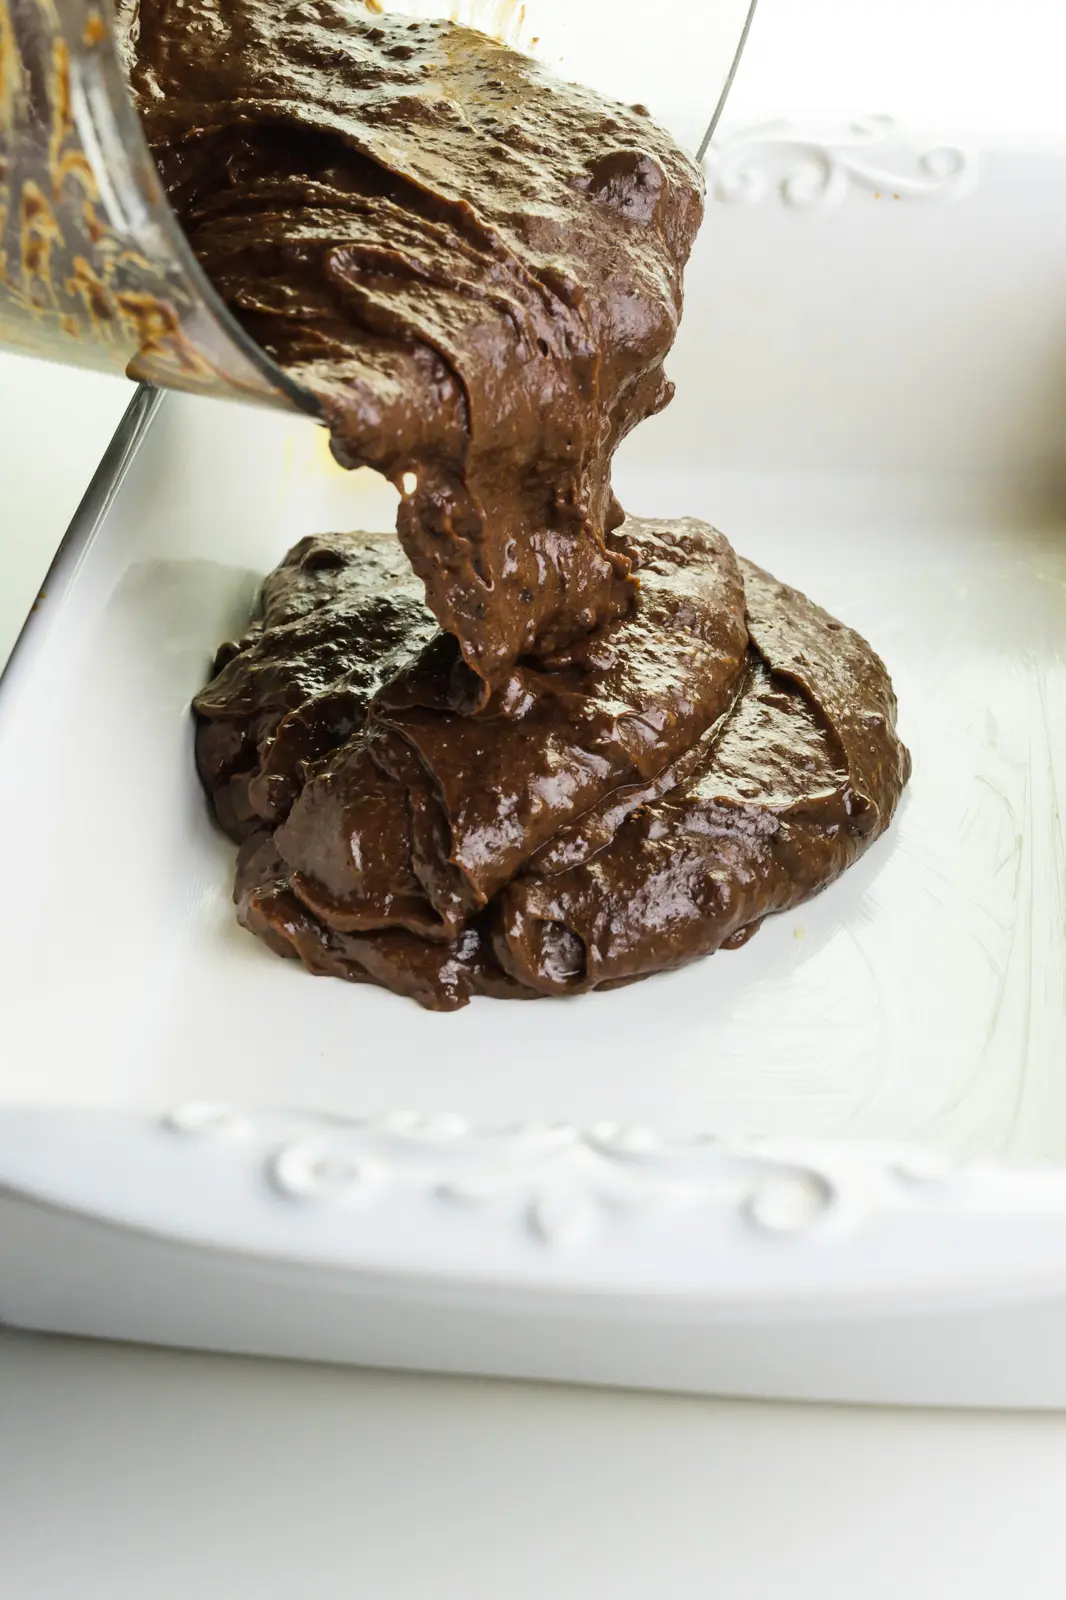 Chocolate brownie batter is being poured into a baking dish.